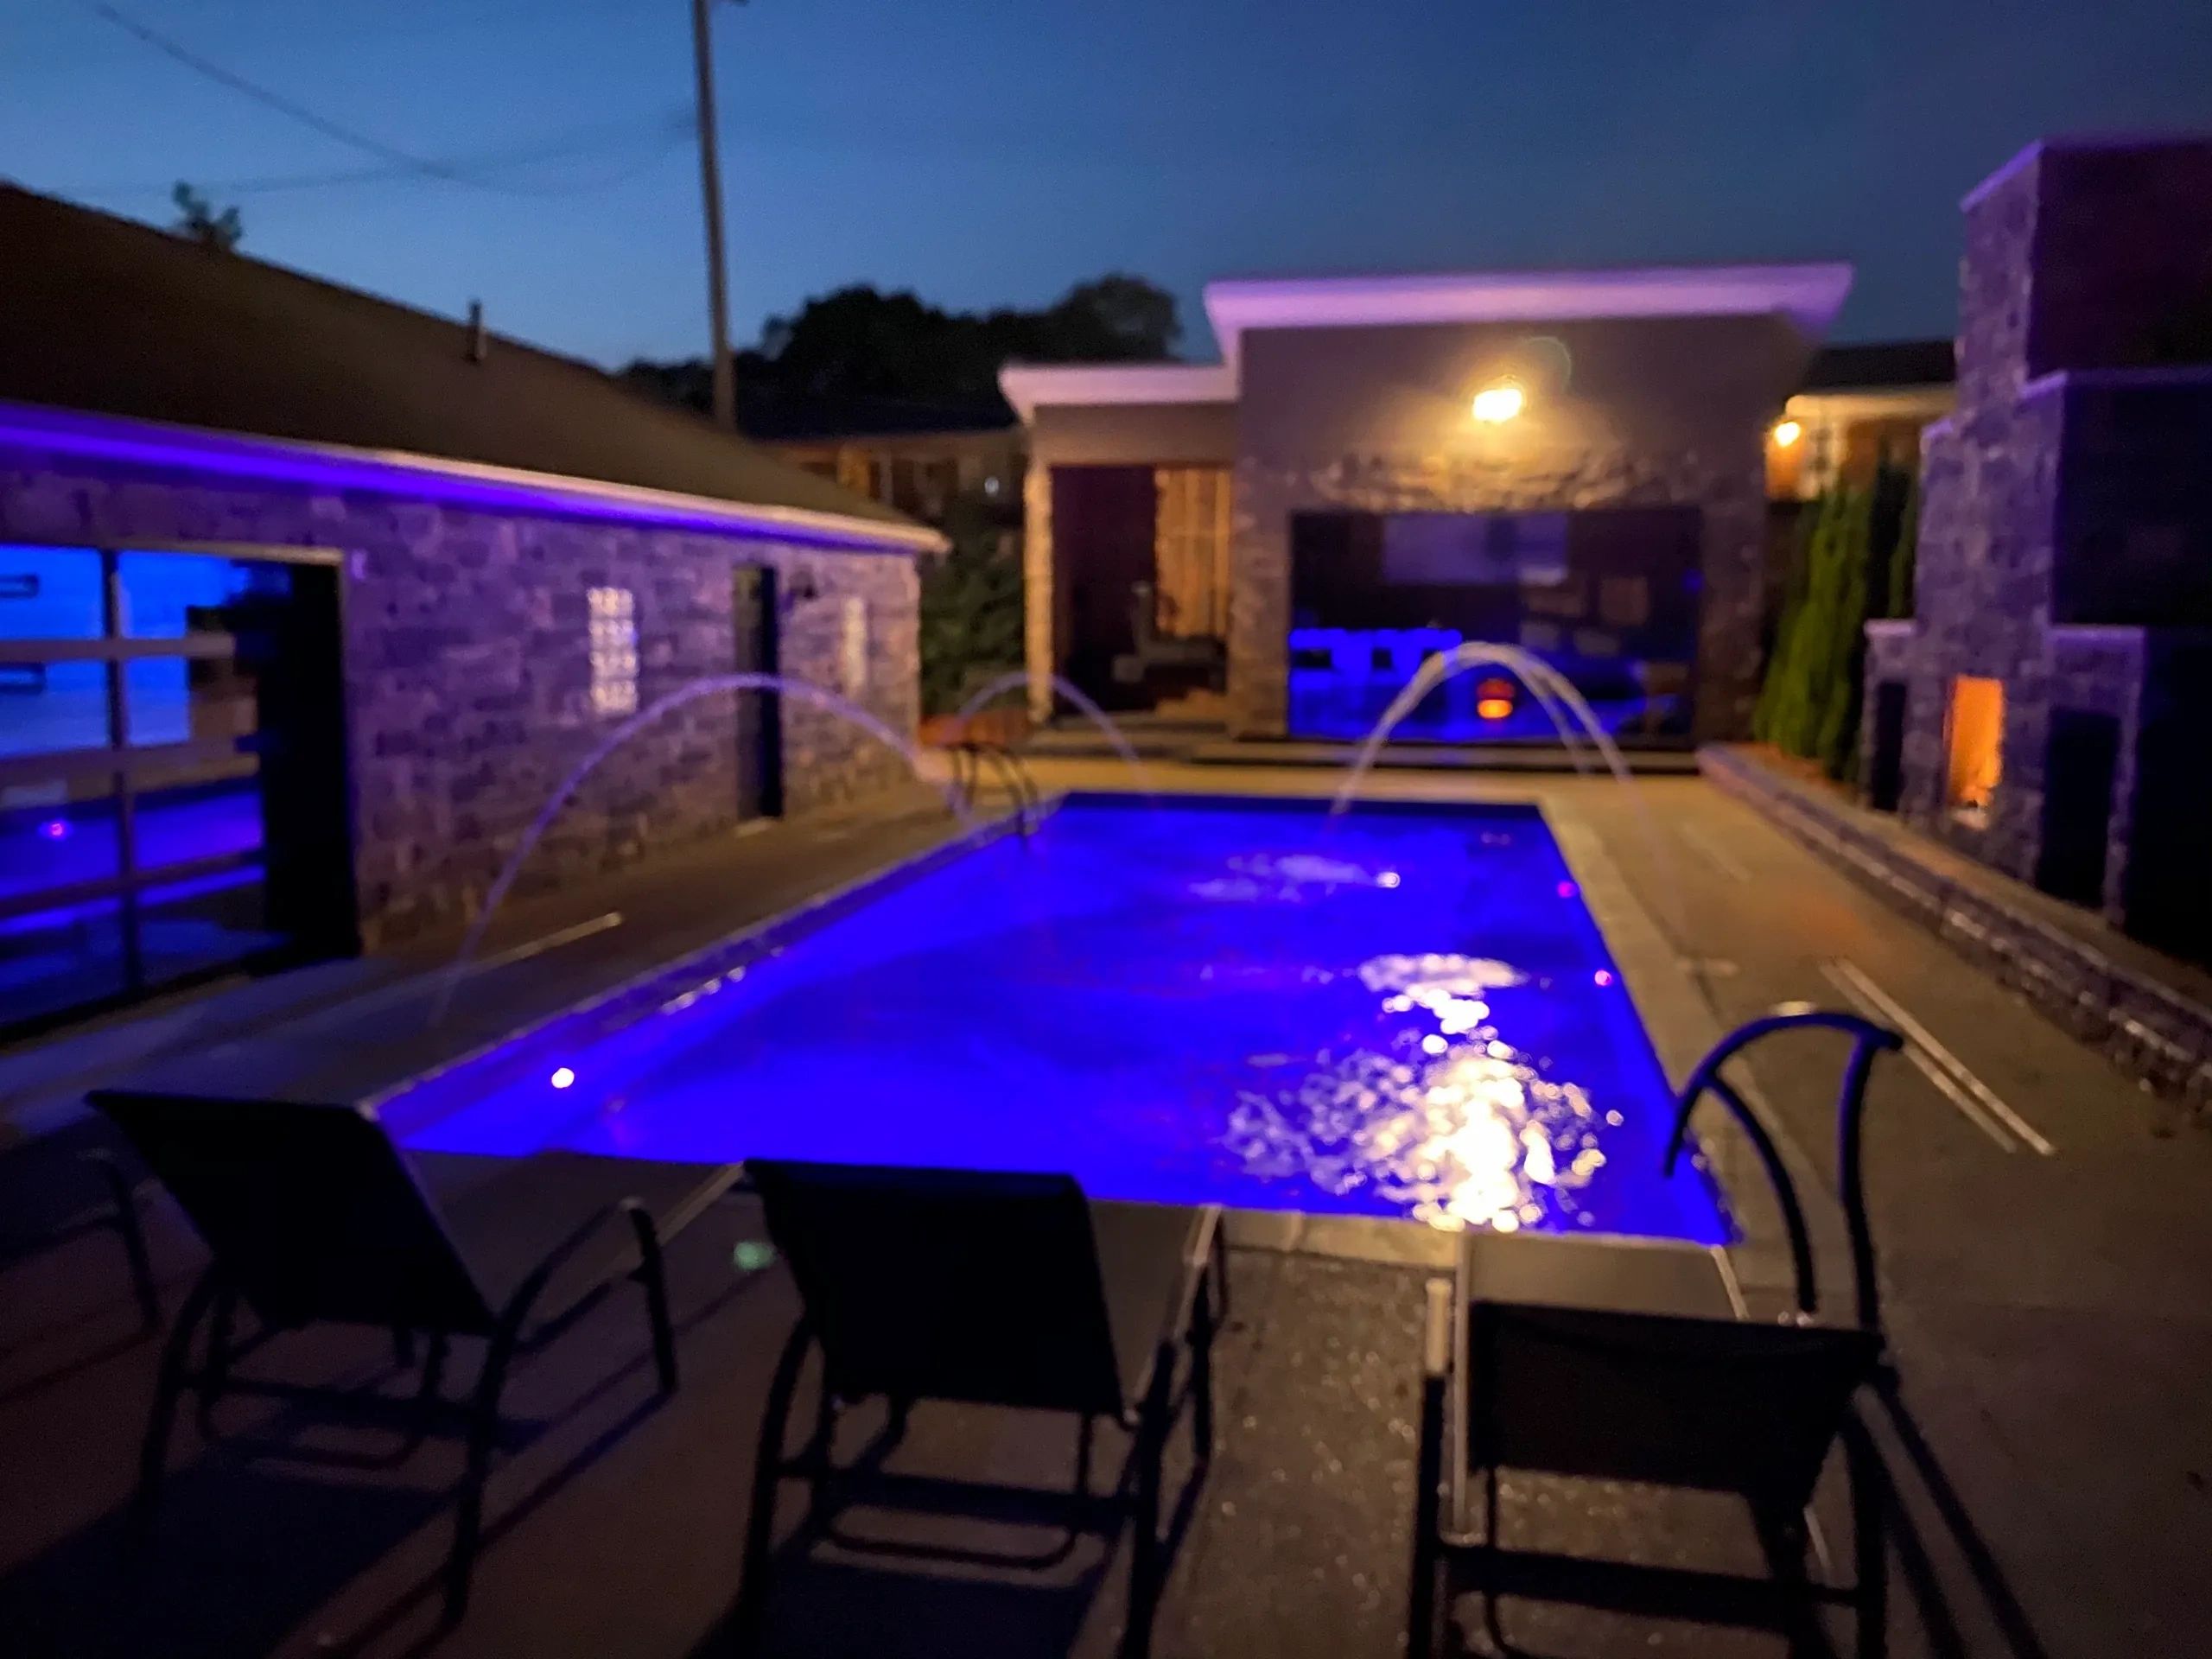 inground pool company, inground pool installation, pool company in shelby township michigan, pools